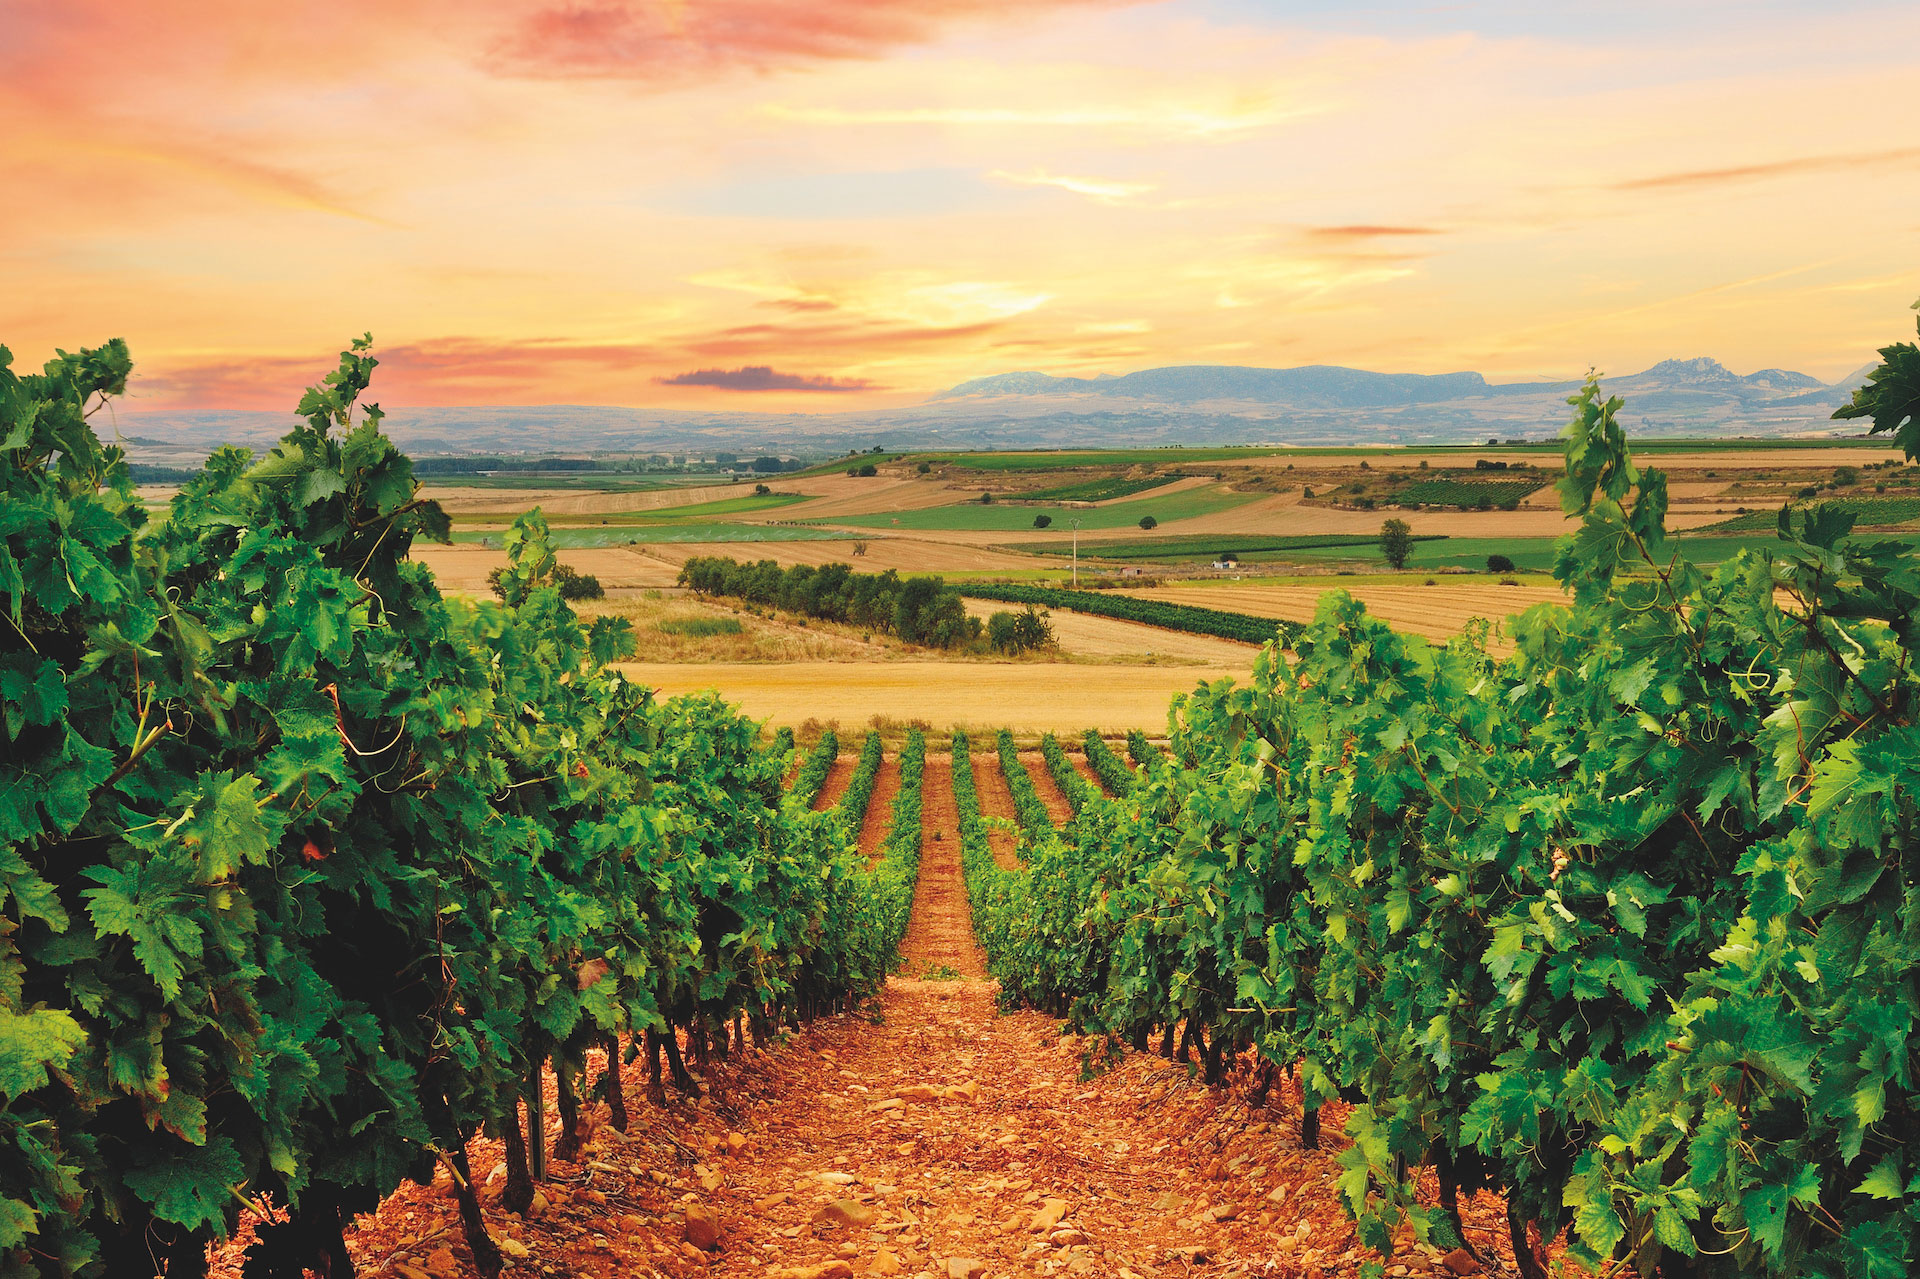 Tour Spain's Wine Country with Insider's Travel